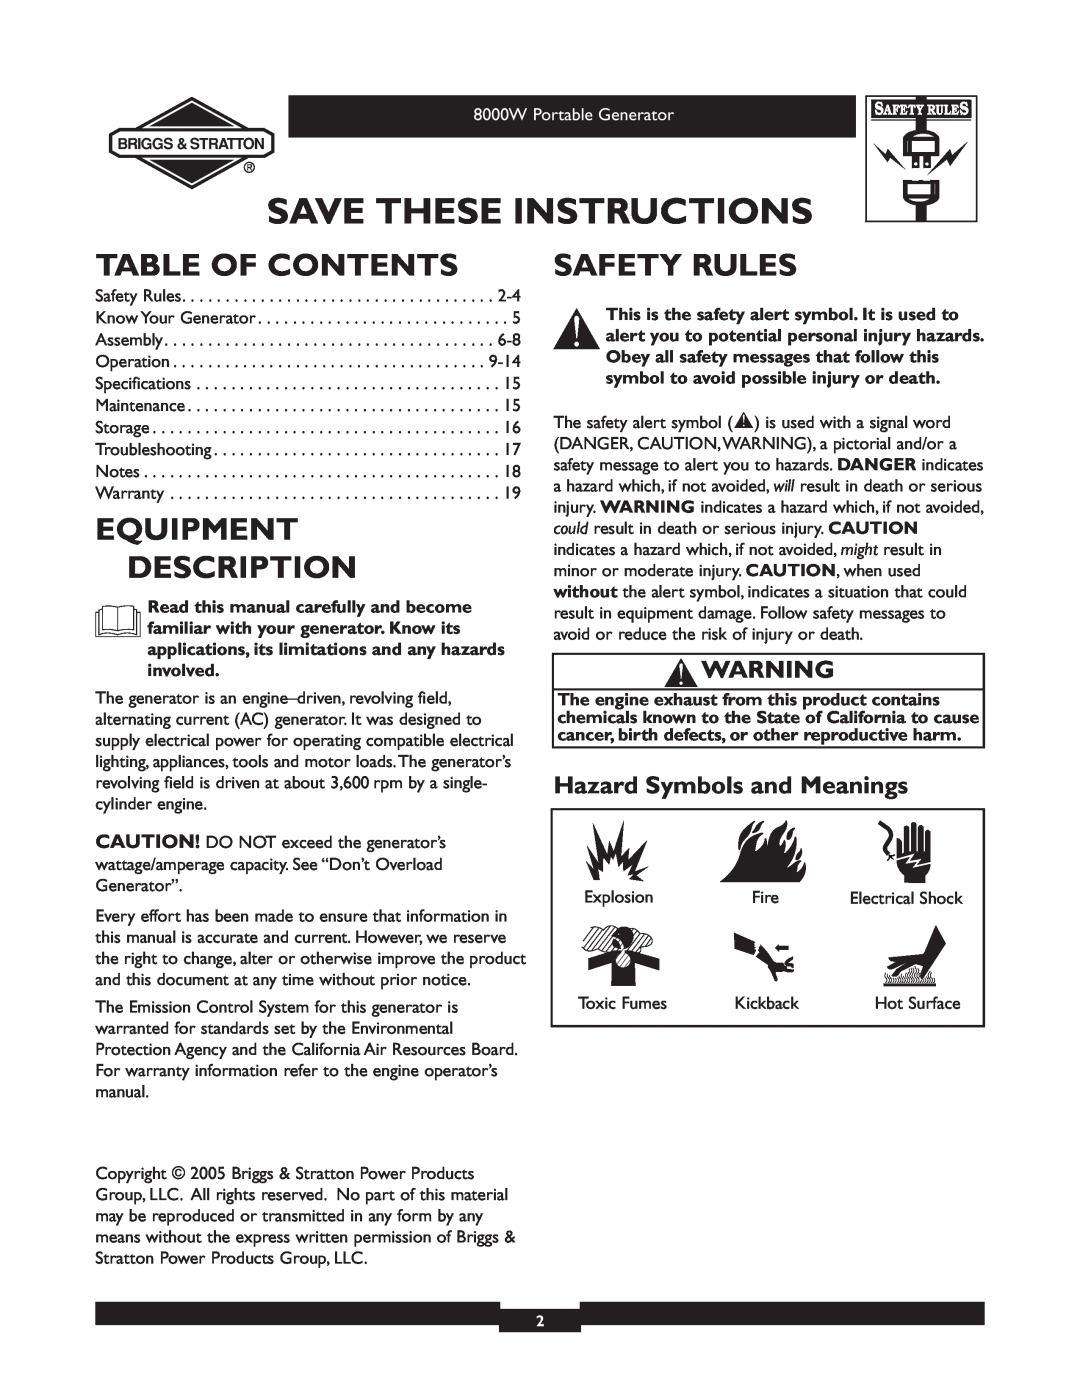 Briggs & Stratton 030210-2 manual Table Of Contents, Equipment Description, Safety Rules, Hazard Symbols and Meanings 